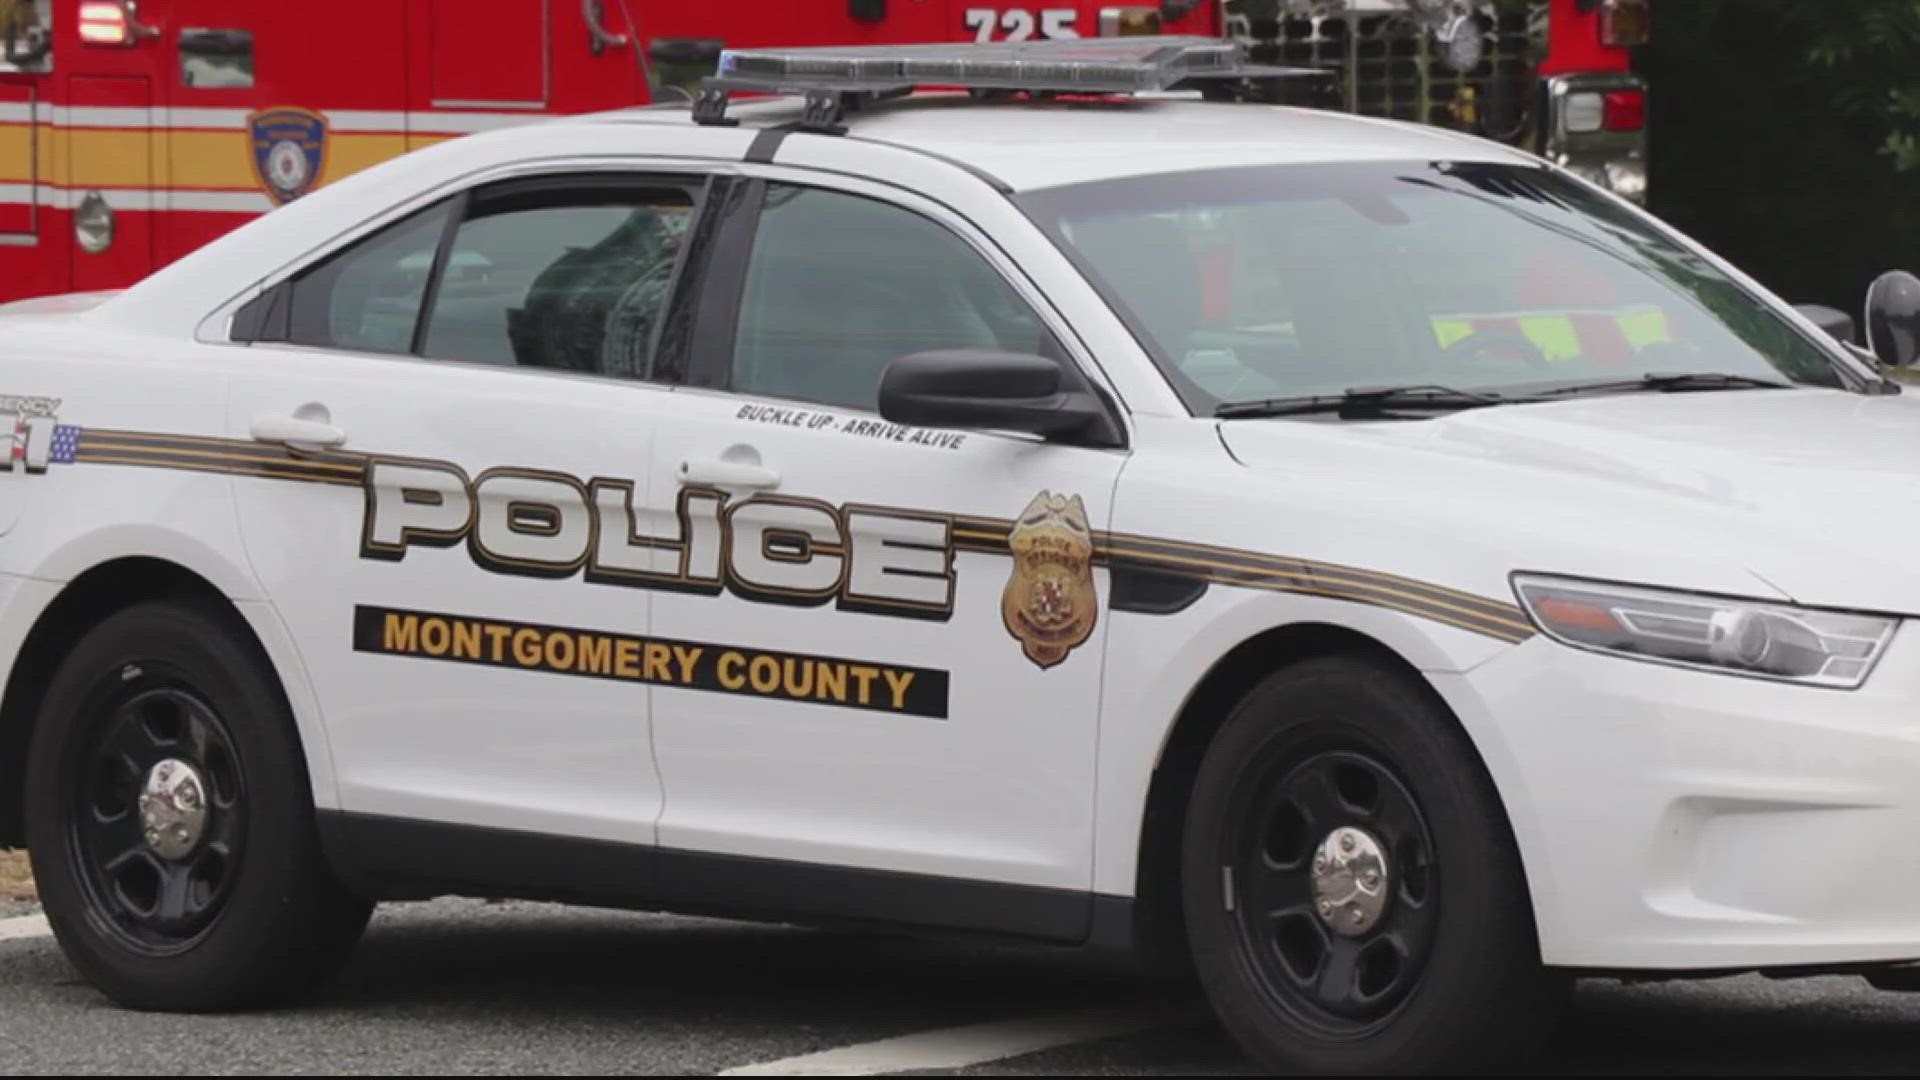 According to an audit of the police department, drivers in Montgomery County are more likely to be pulled over and searched if they are Black.